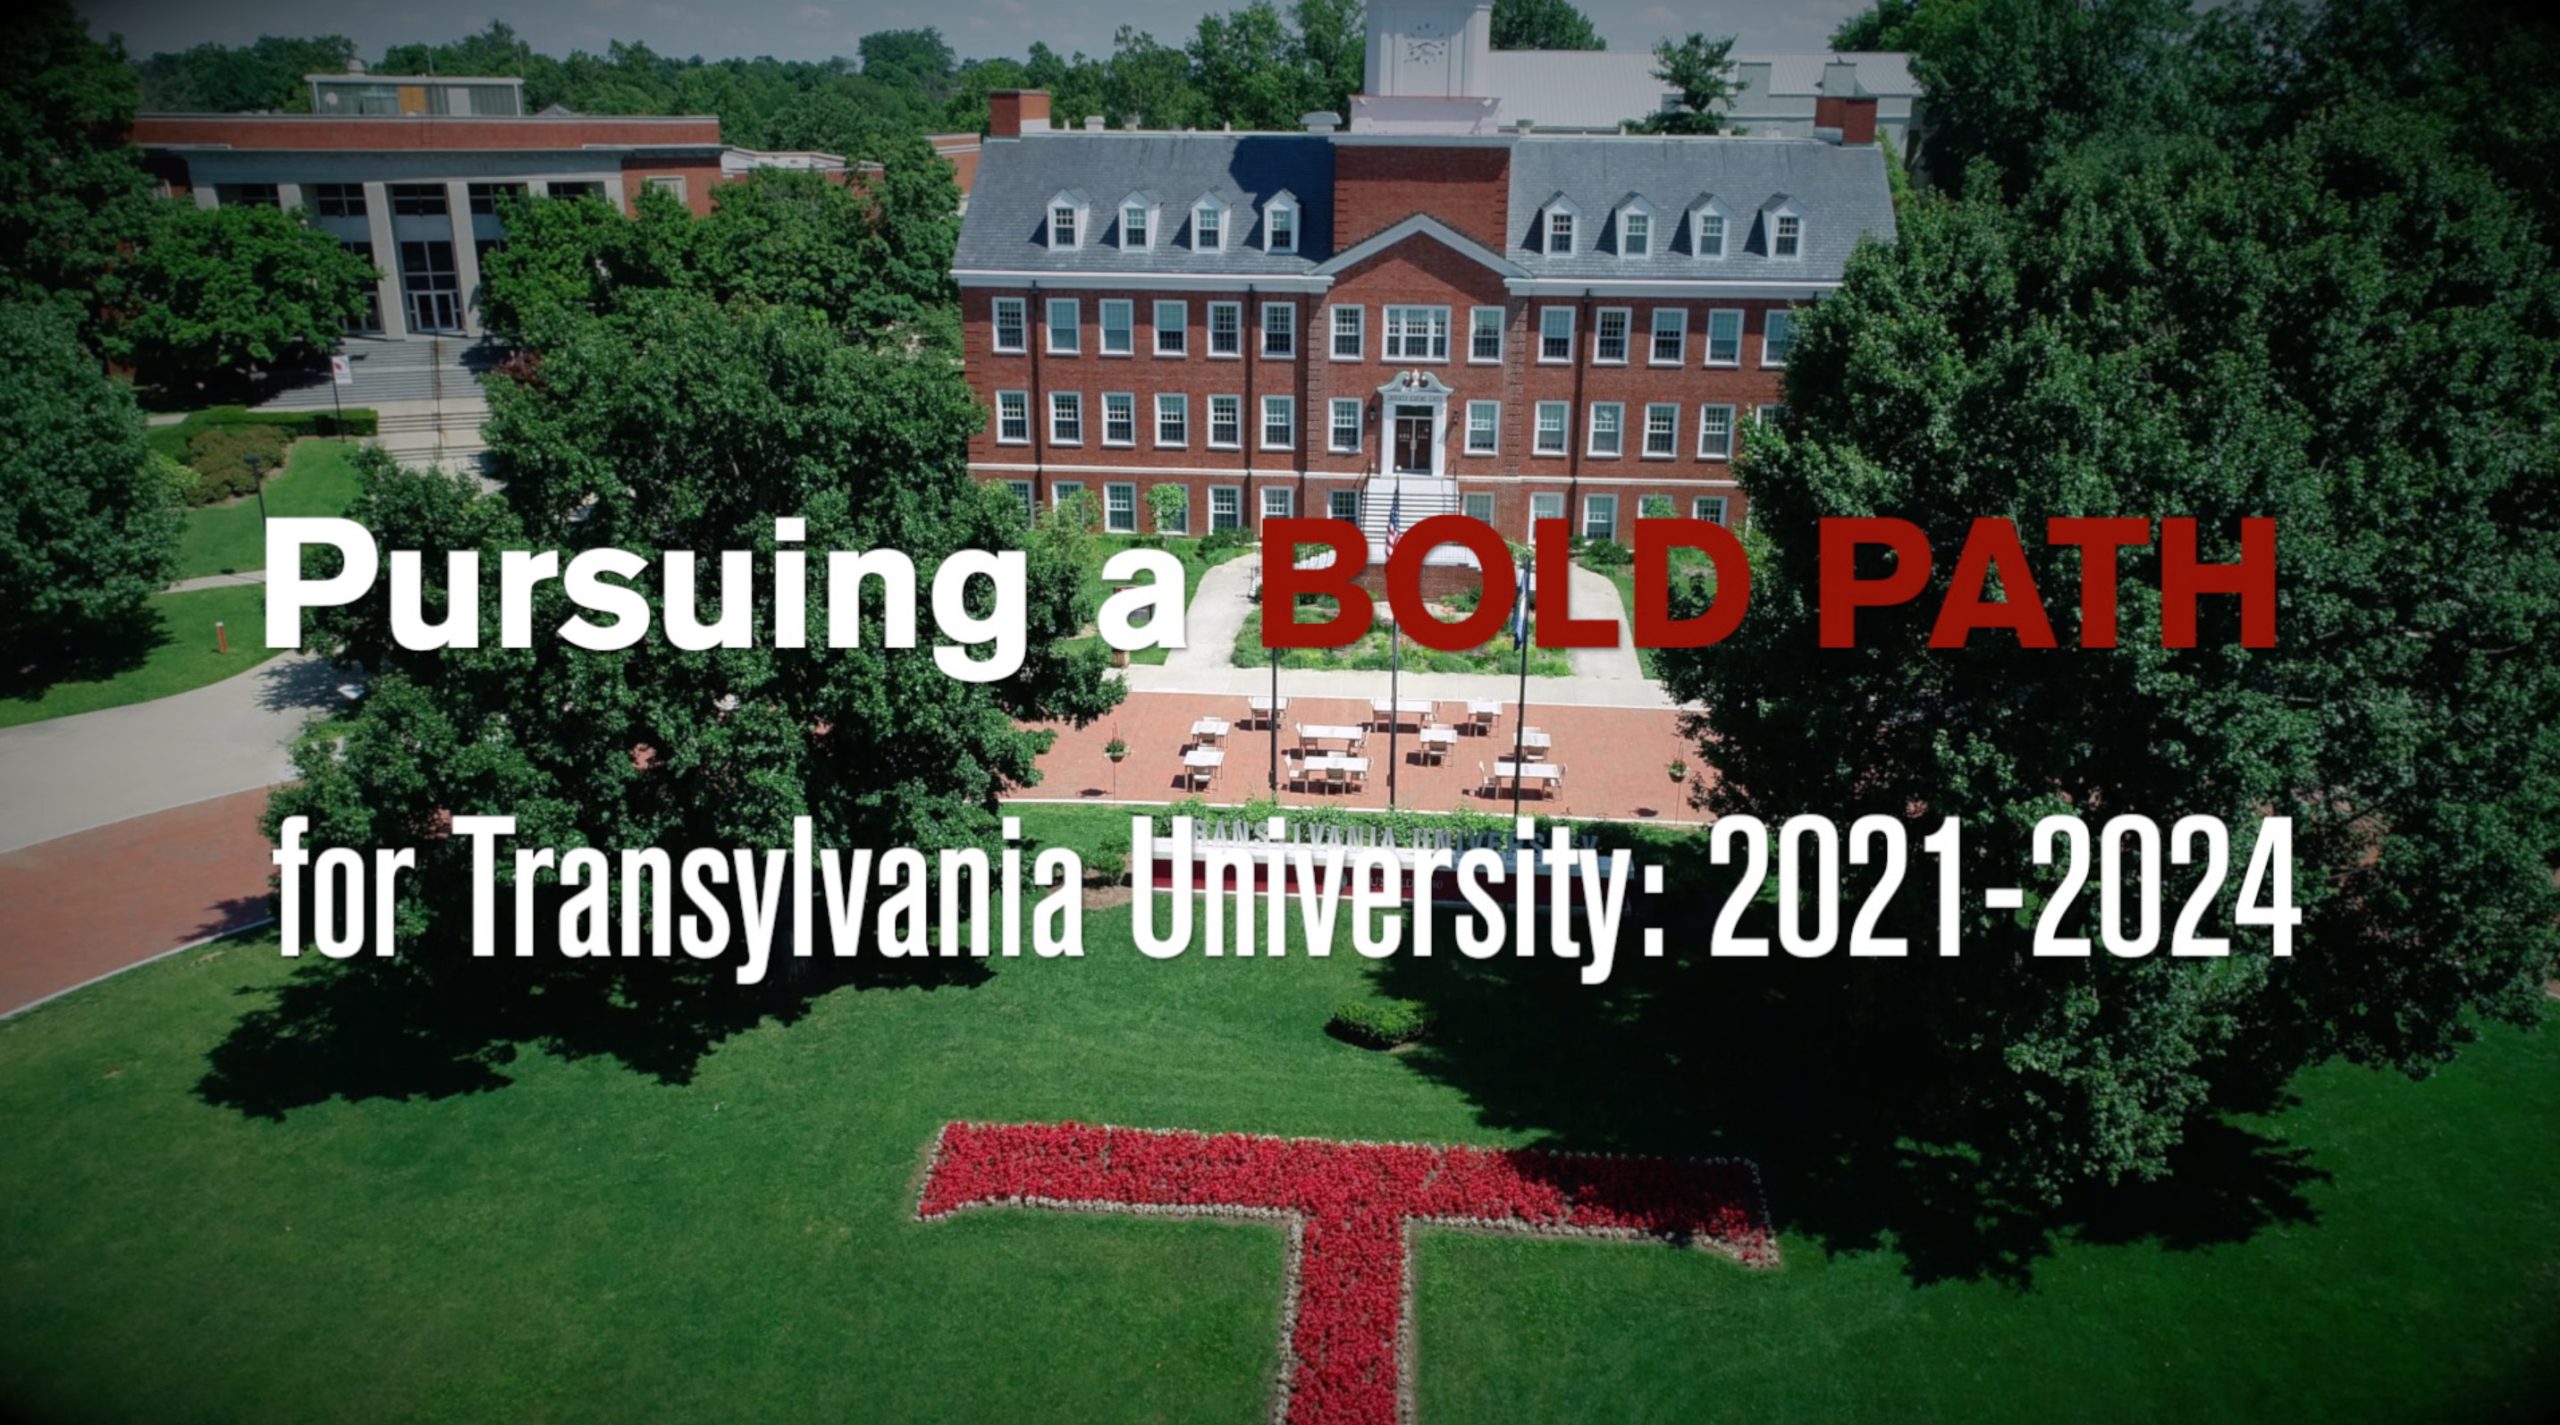 Transylvania releases three-year roadmap to grow enrollment, support students